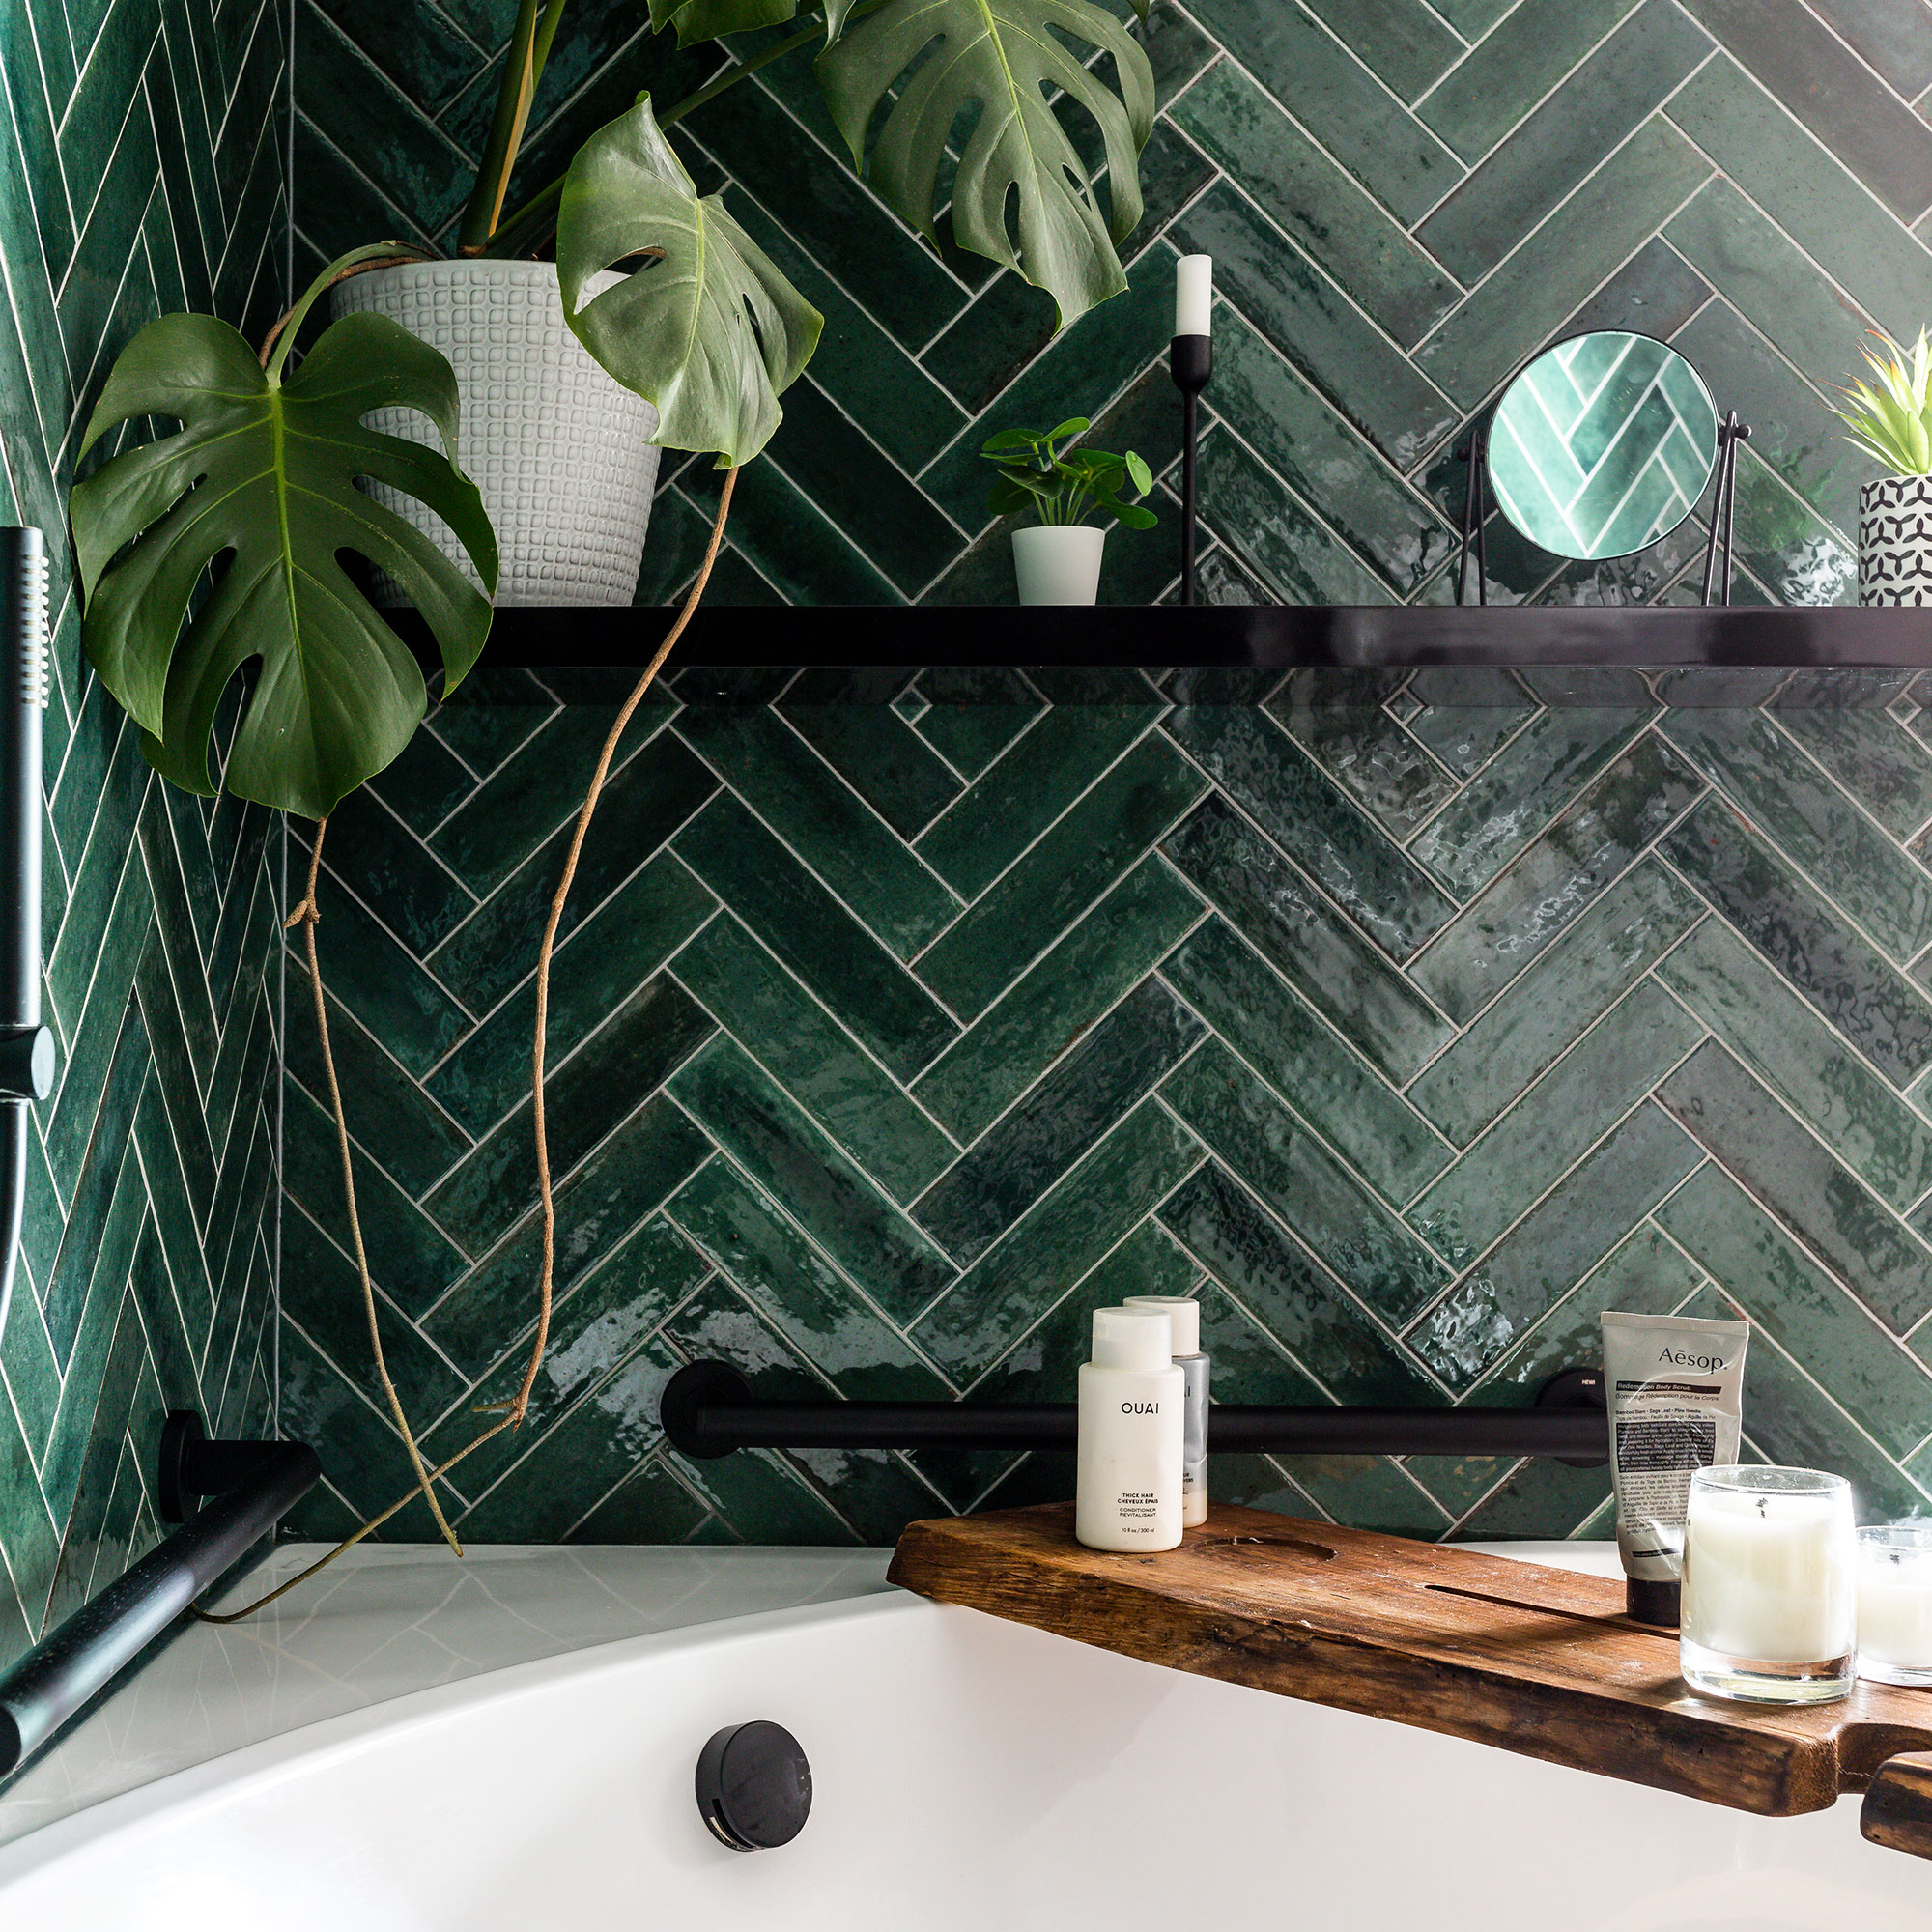 36 Bathroom Color Ideas That Will Wow You